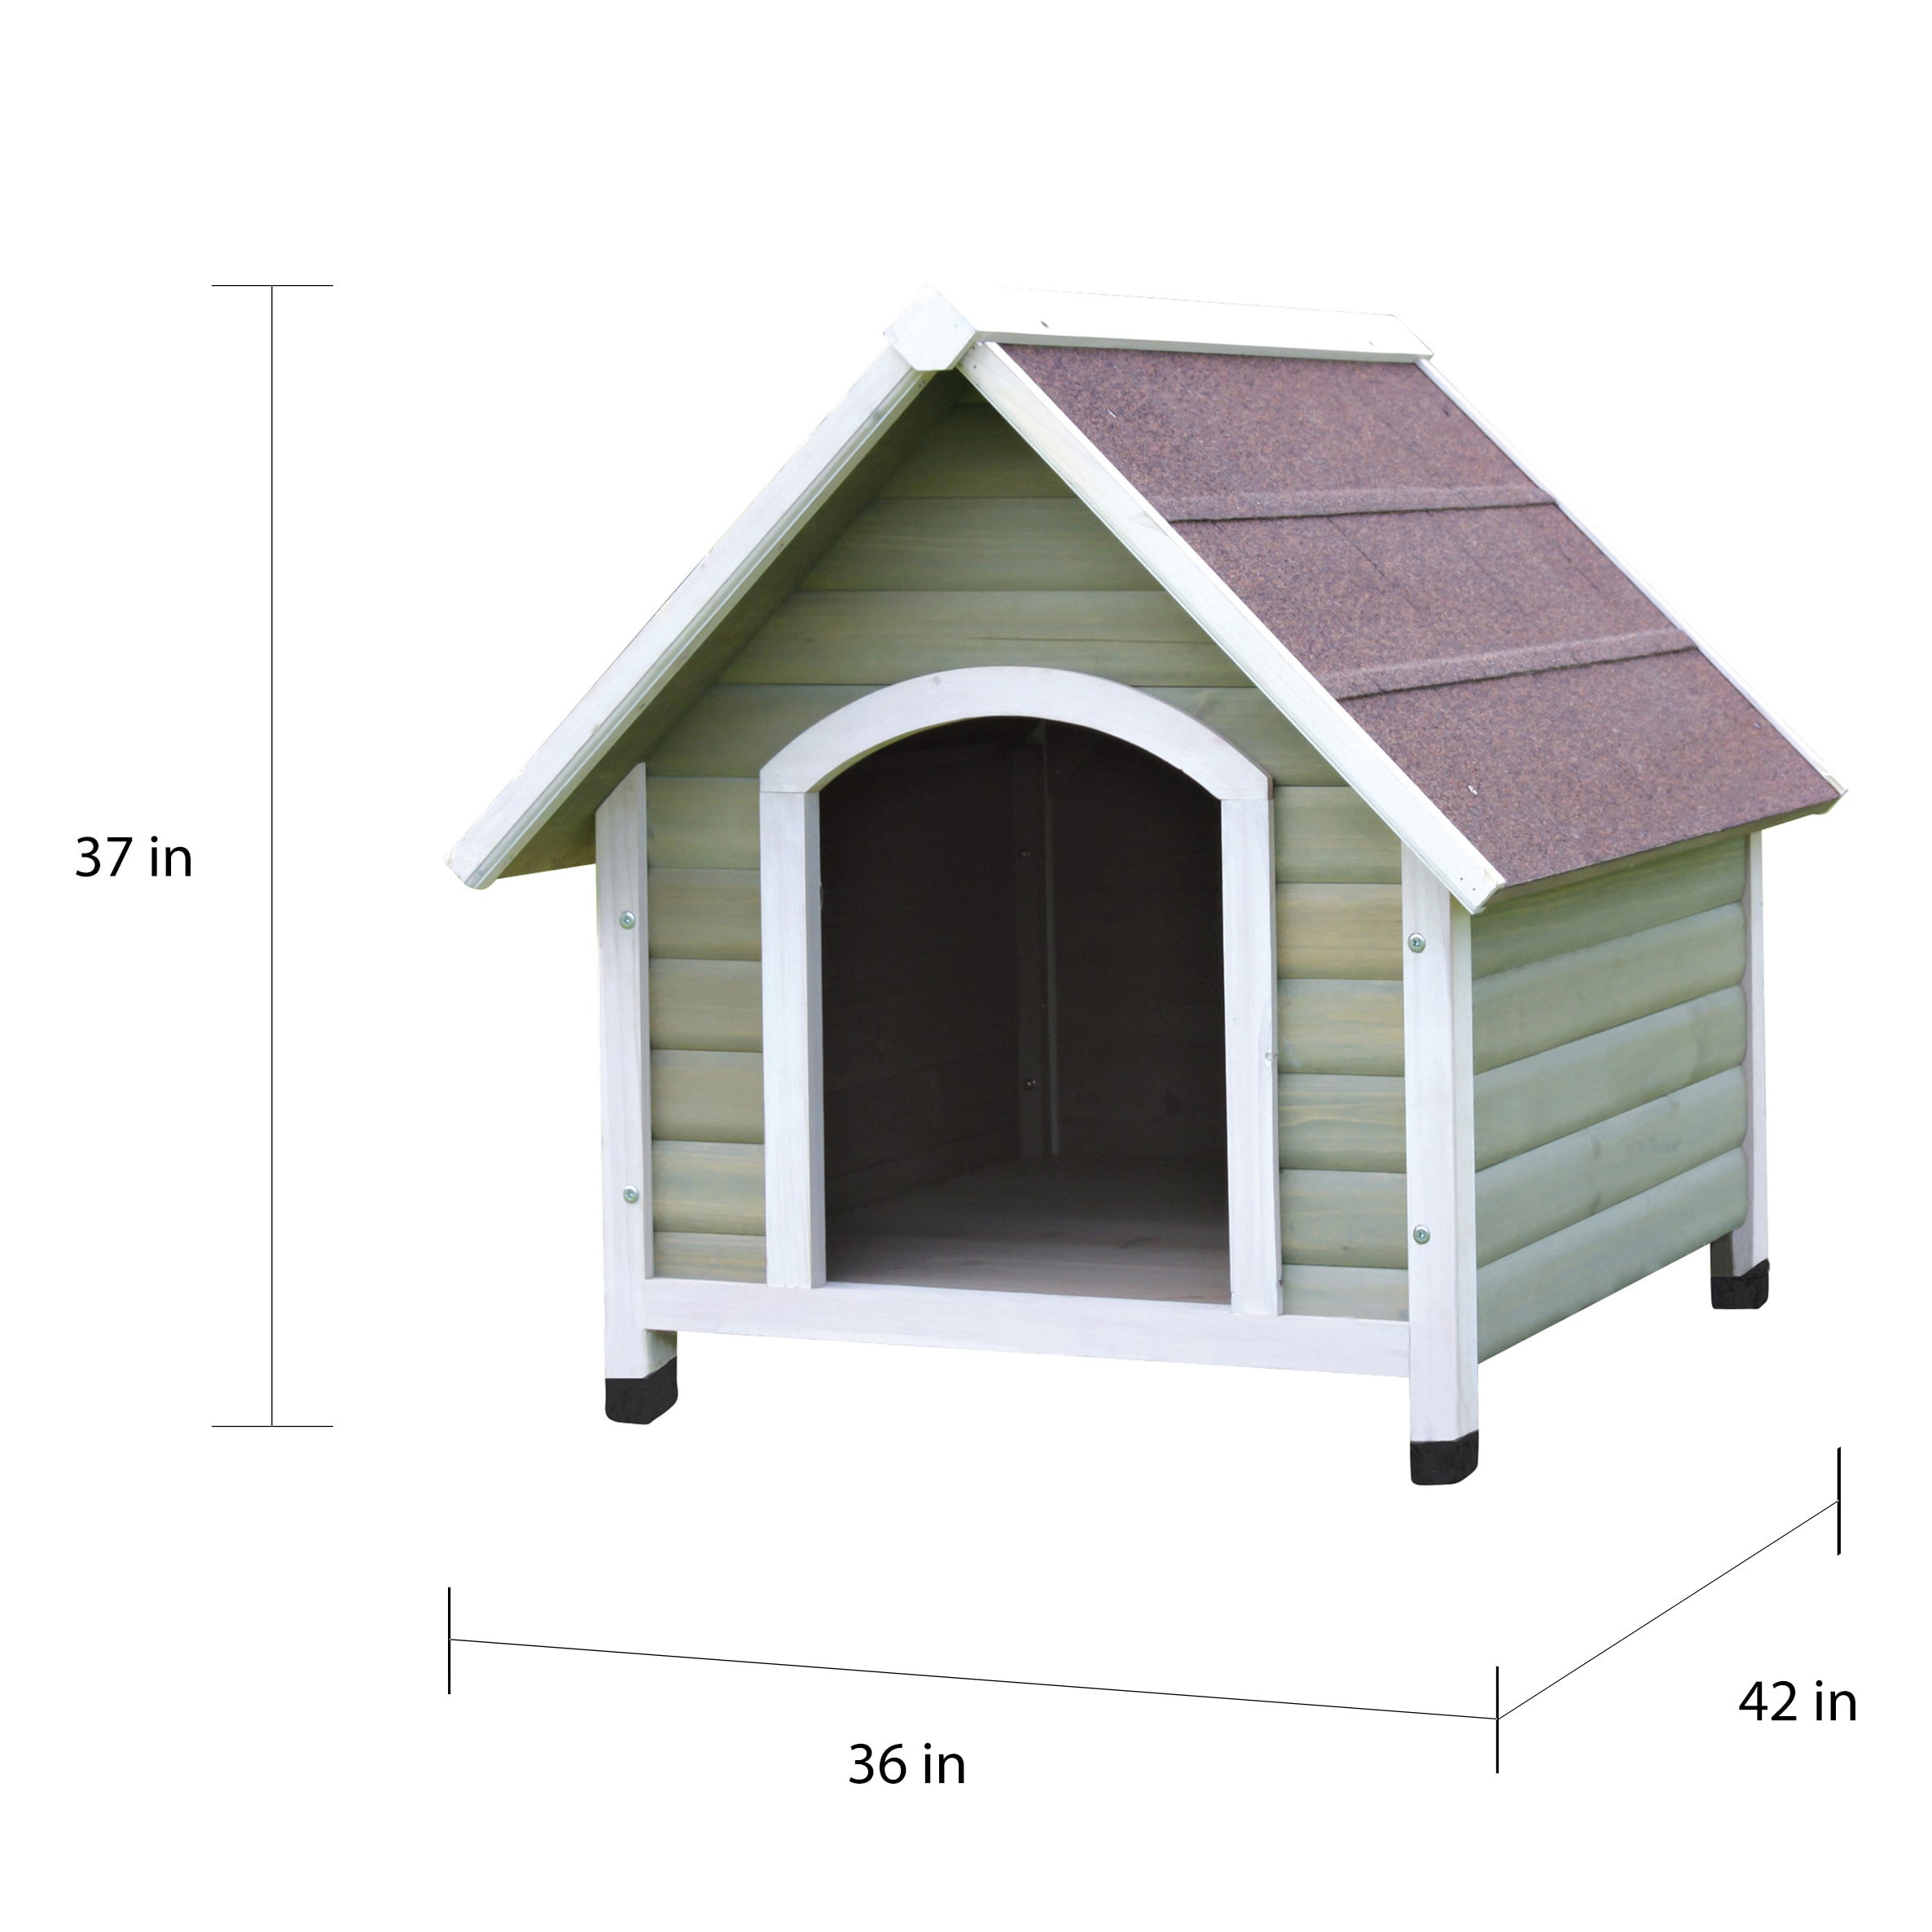 trixie rustic dog house